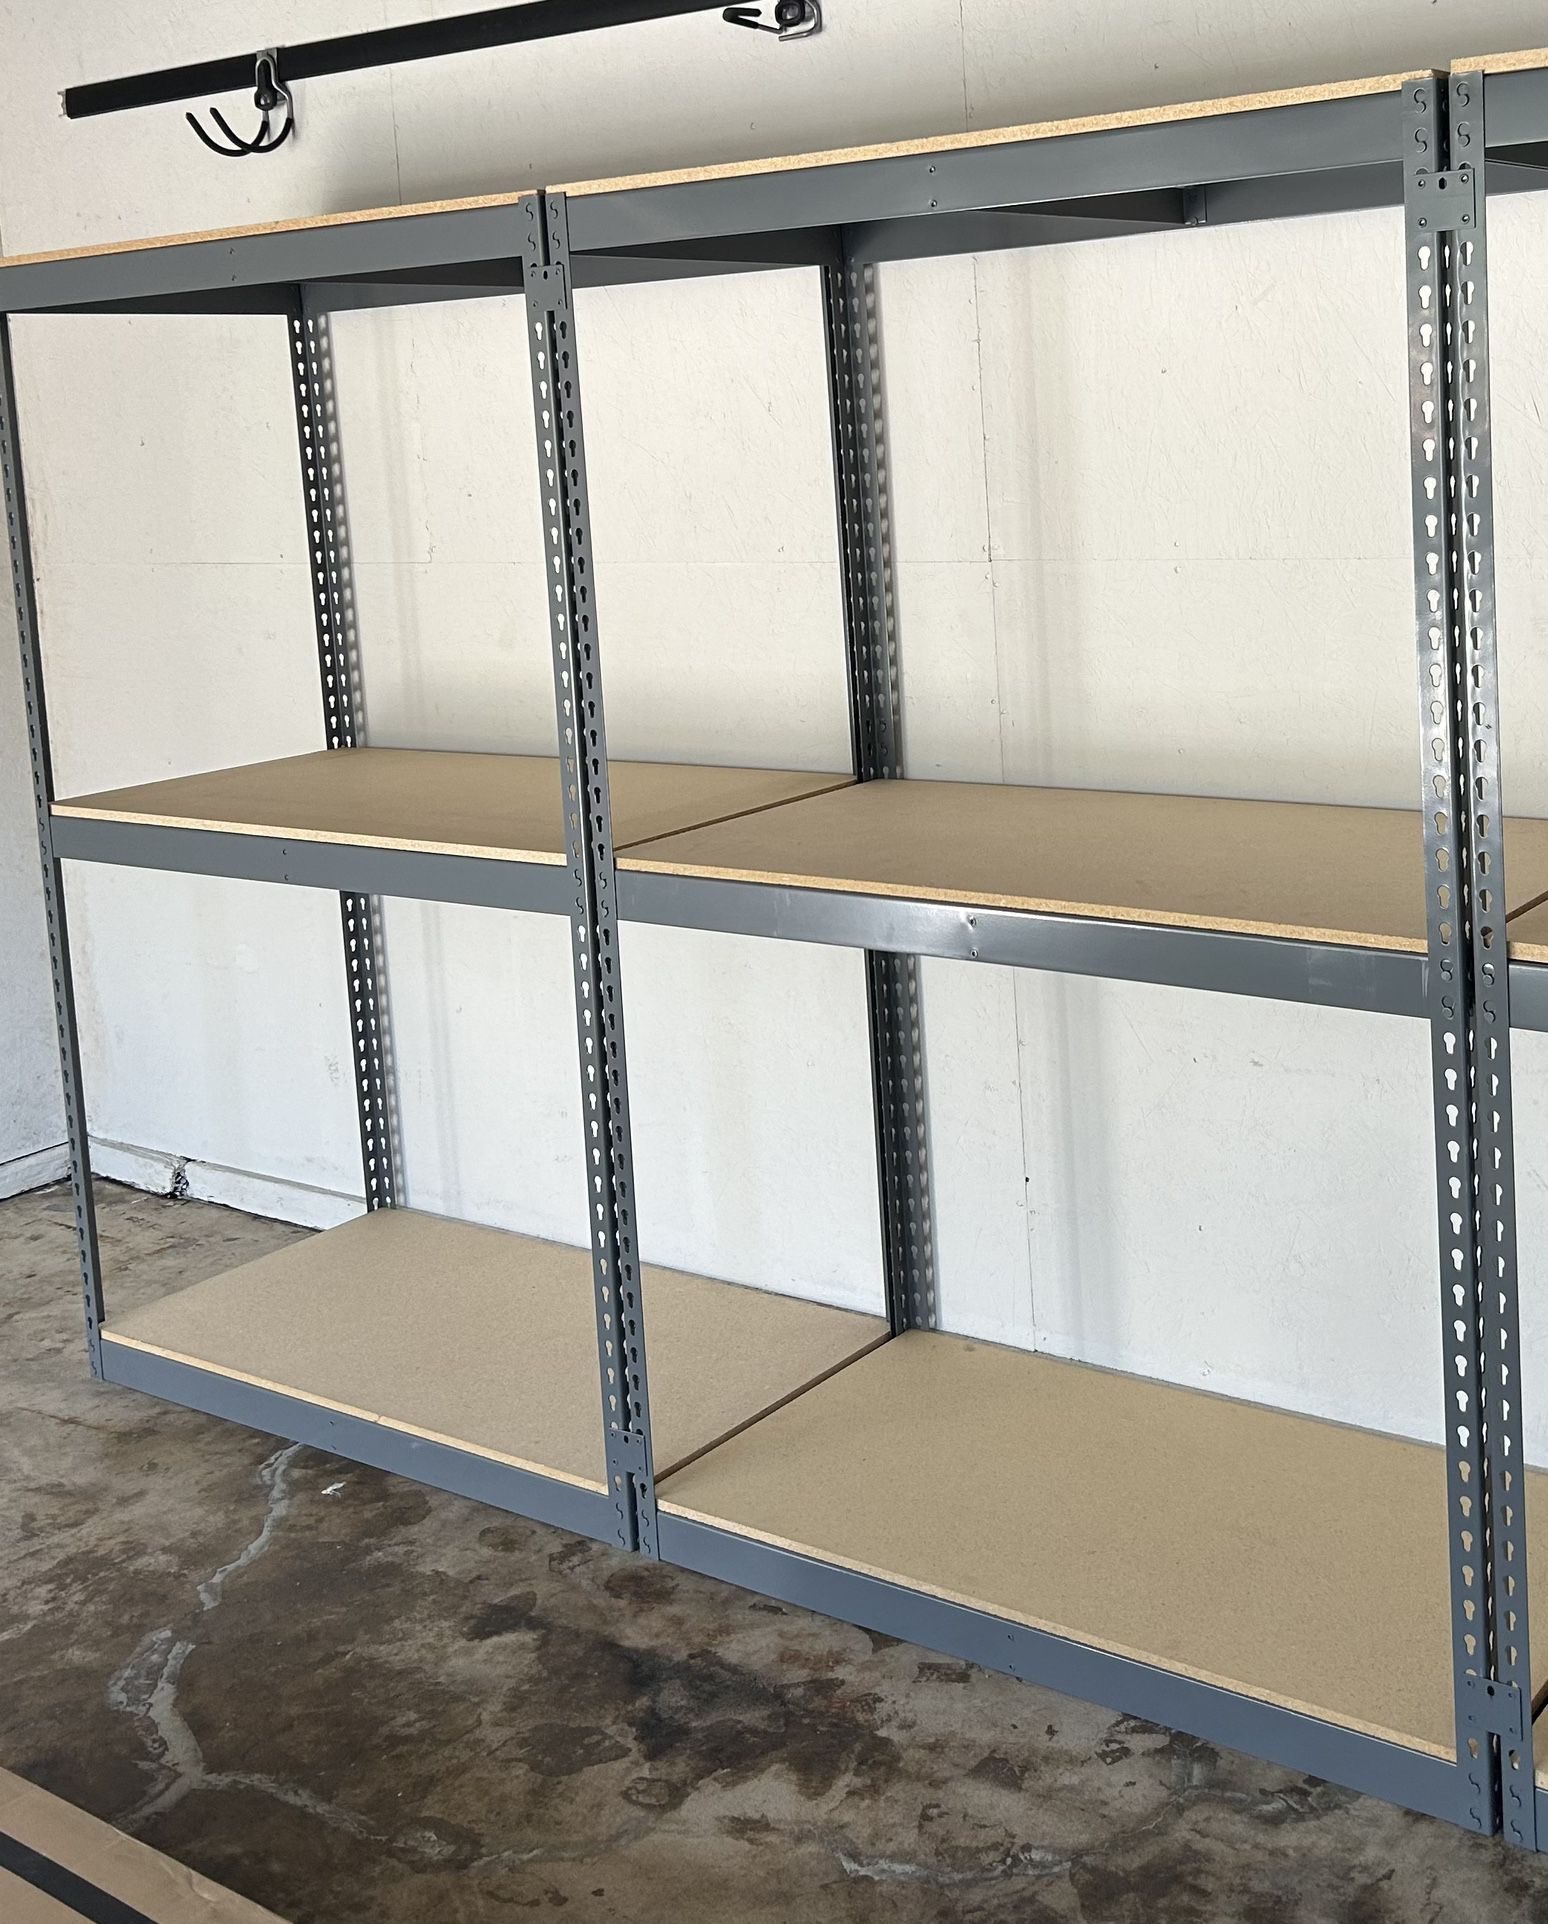 Shelving 48 in W x 24 in D New Industrial Boltless Warehouse & Garage Racks Stronger Than HomeDepot Lowes Costco Delivery & Assembly Available